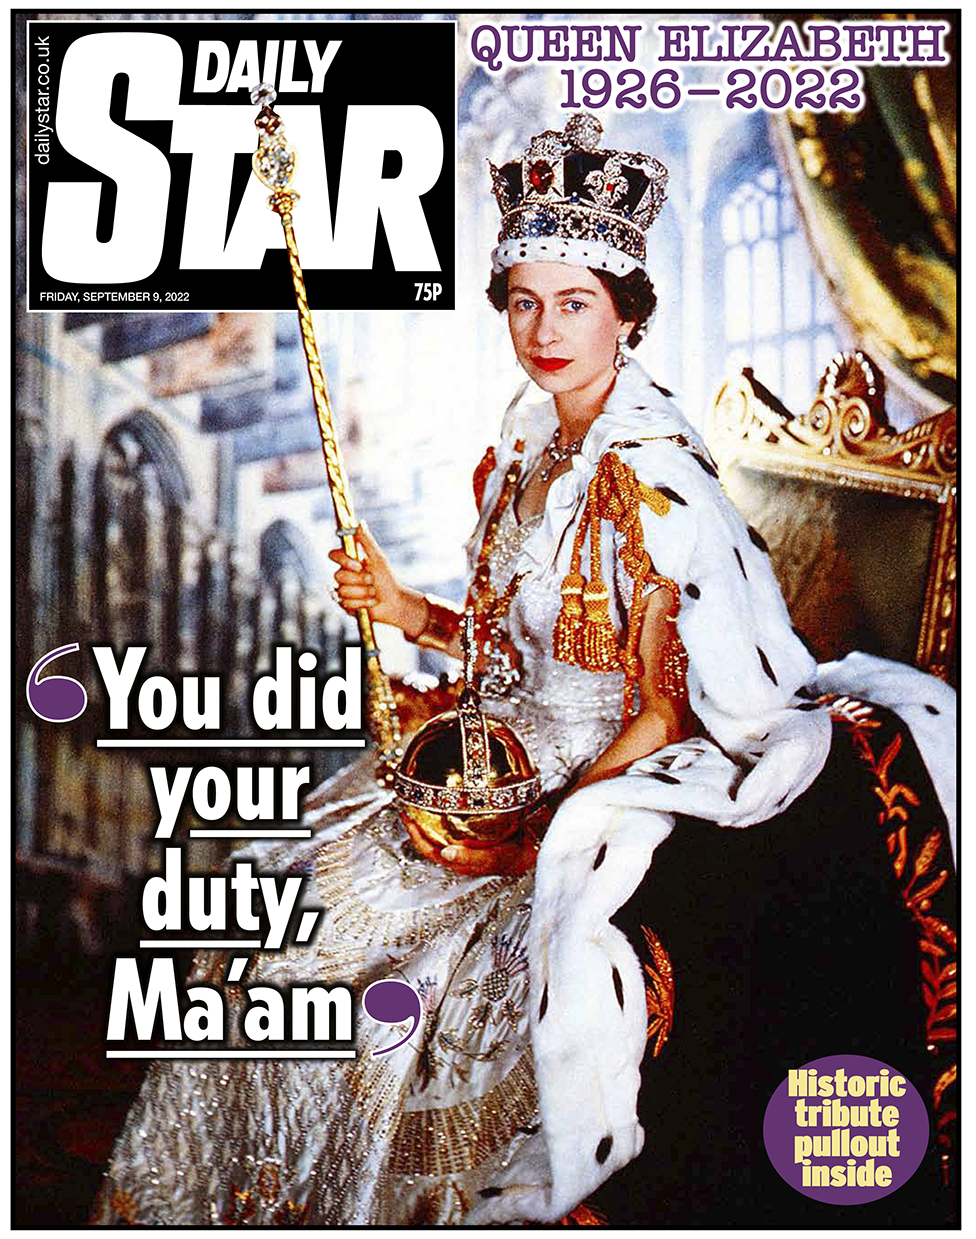 The Daily Star front page